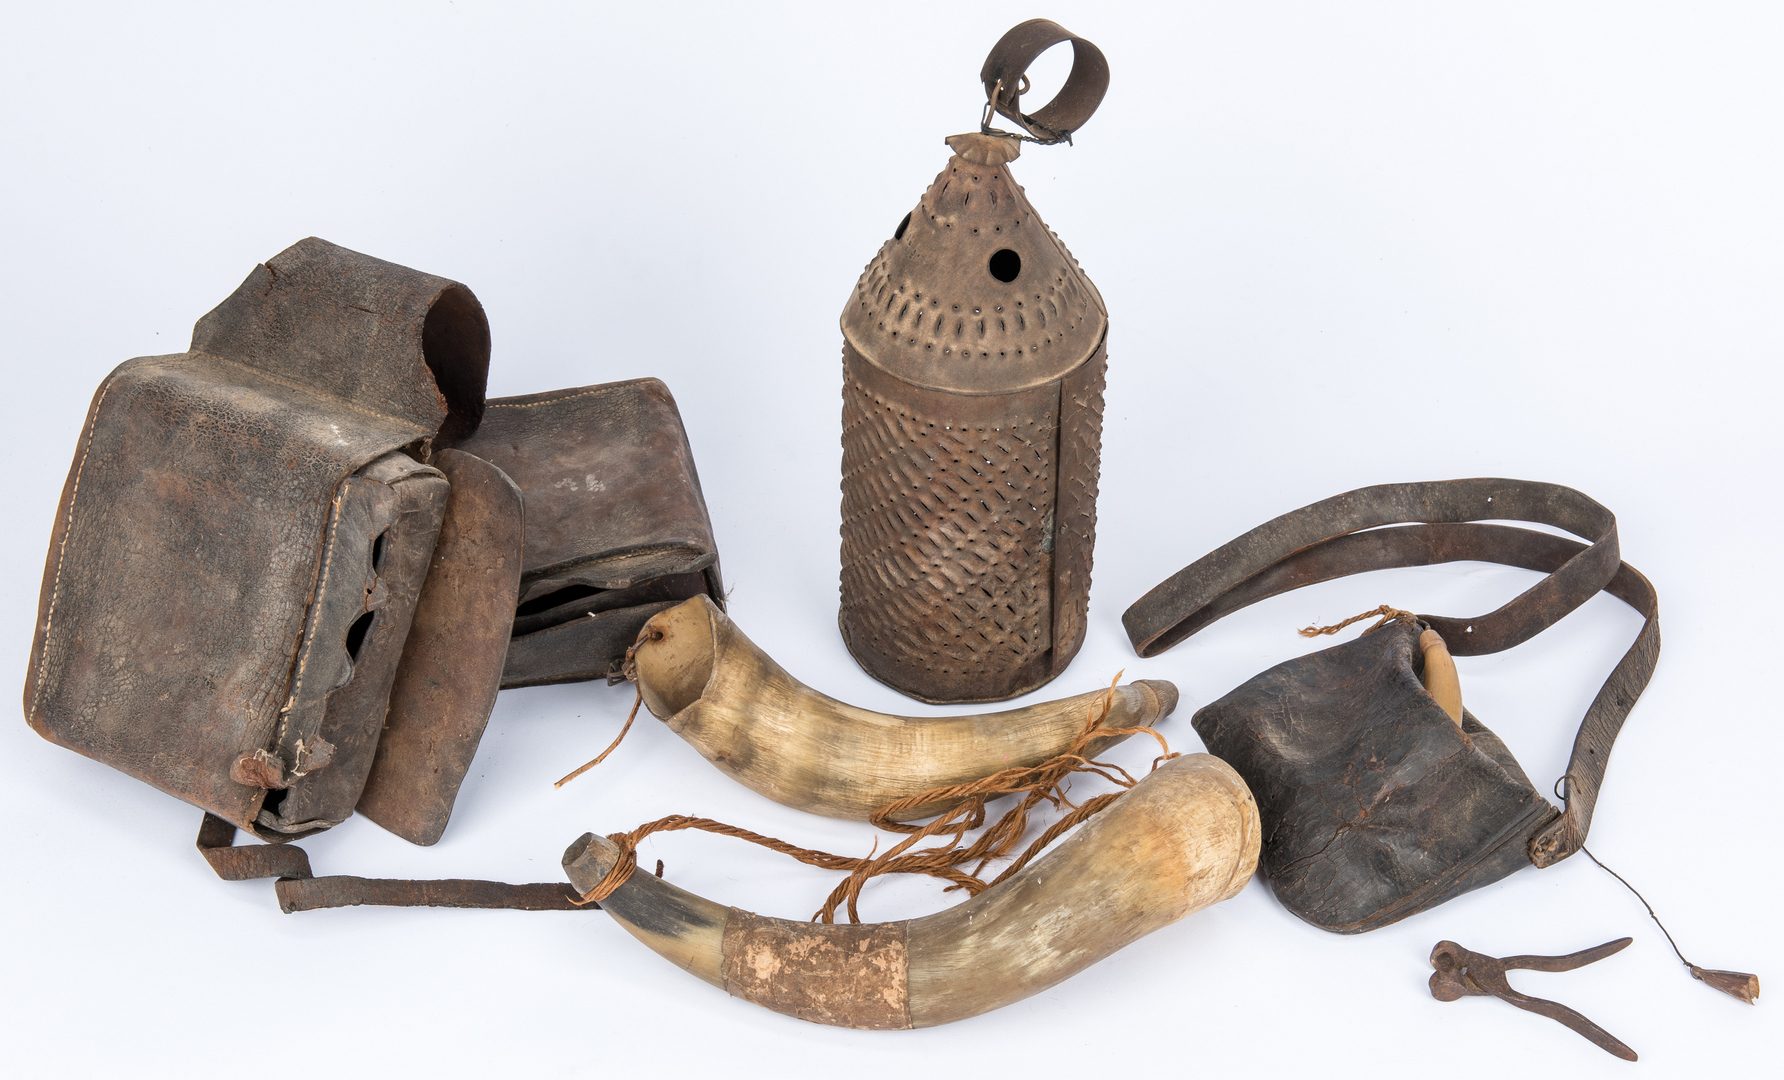 Lot 400: Grouping of Early Frontier Accessories, incl. Punched Lantern, Saddlebags